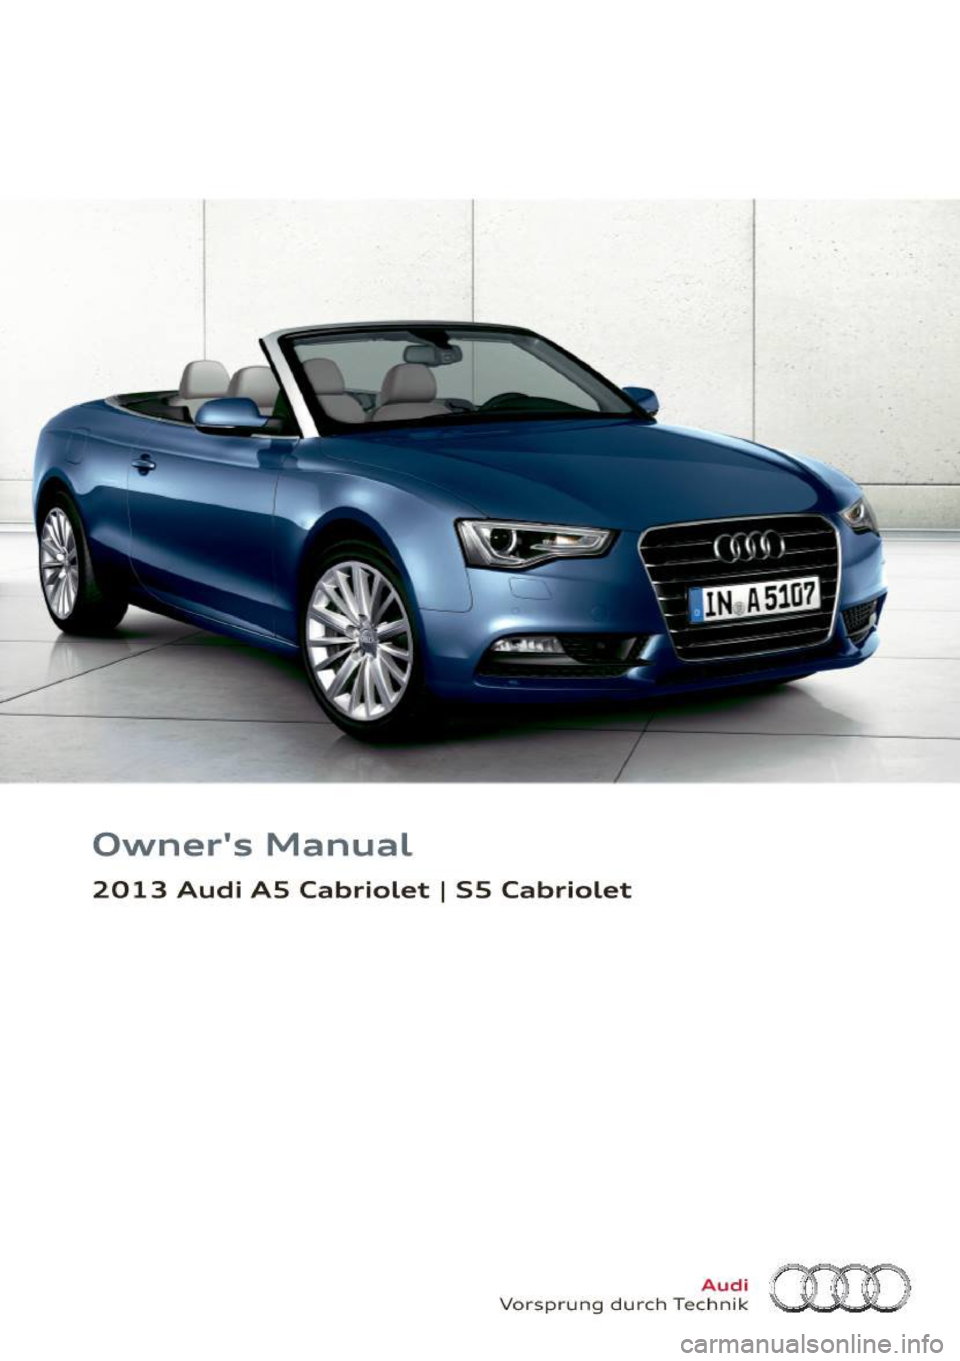 AUDI A5 CABRIOLET 2013  Owners Manual Owners  Manual 
2013  Audi  AS  Cabriolet I S5  Cabriolet 
Vorsp rung  du rch  Tec~~f~ (HD  